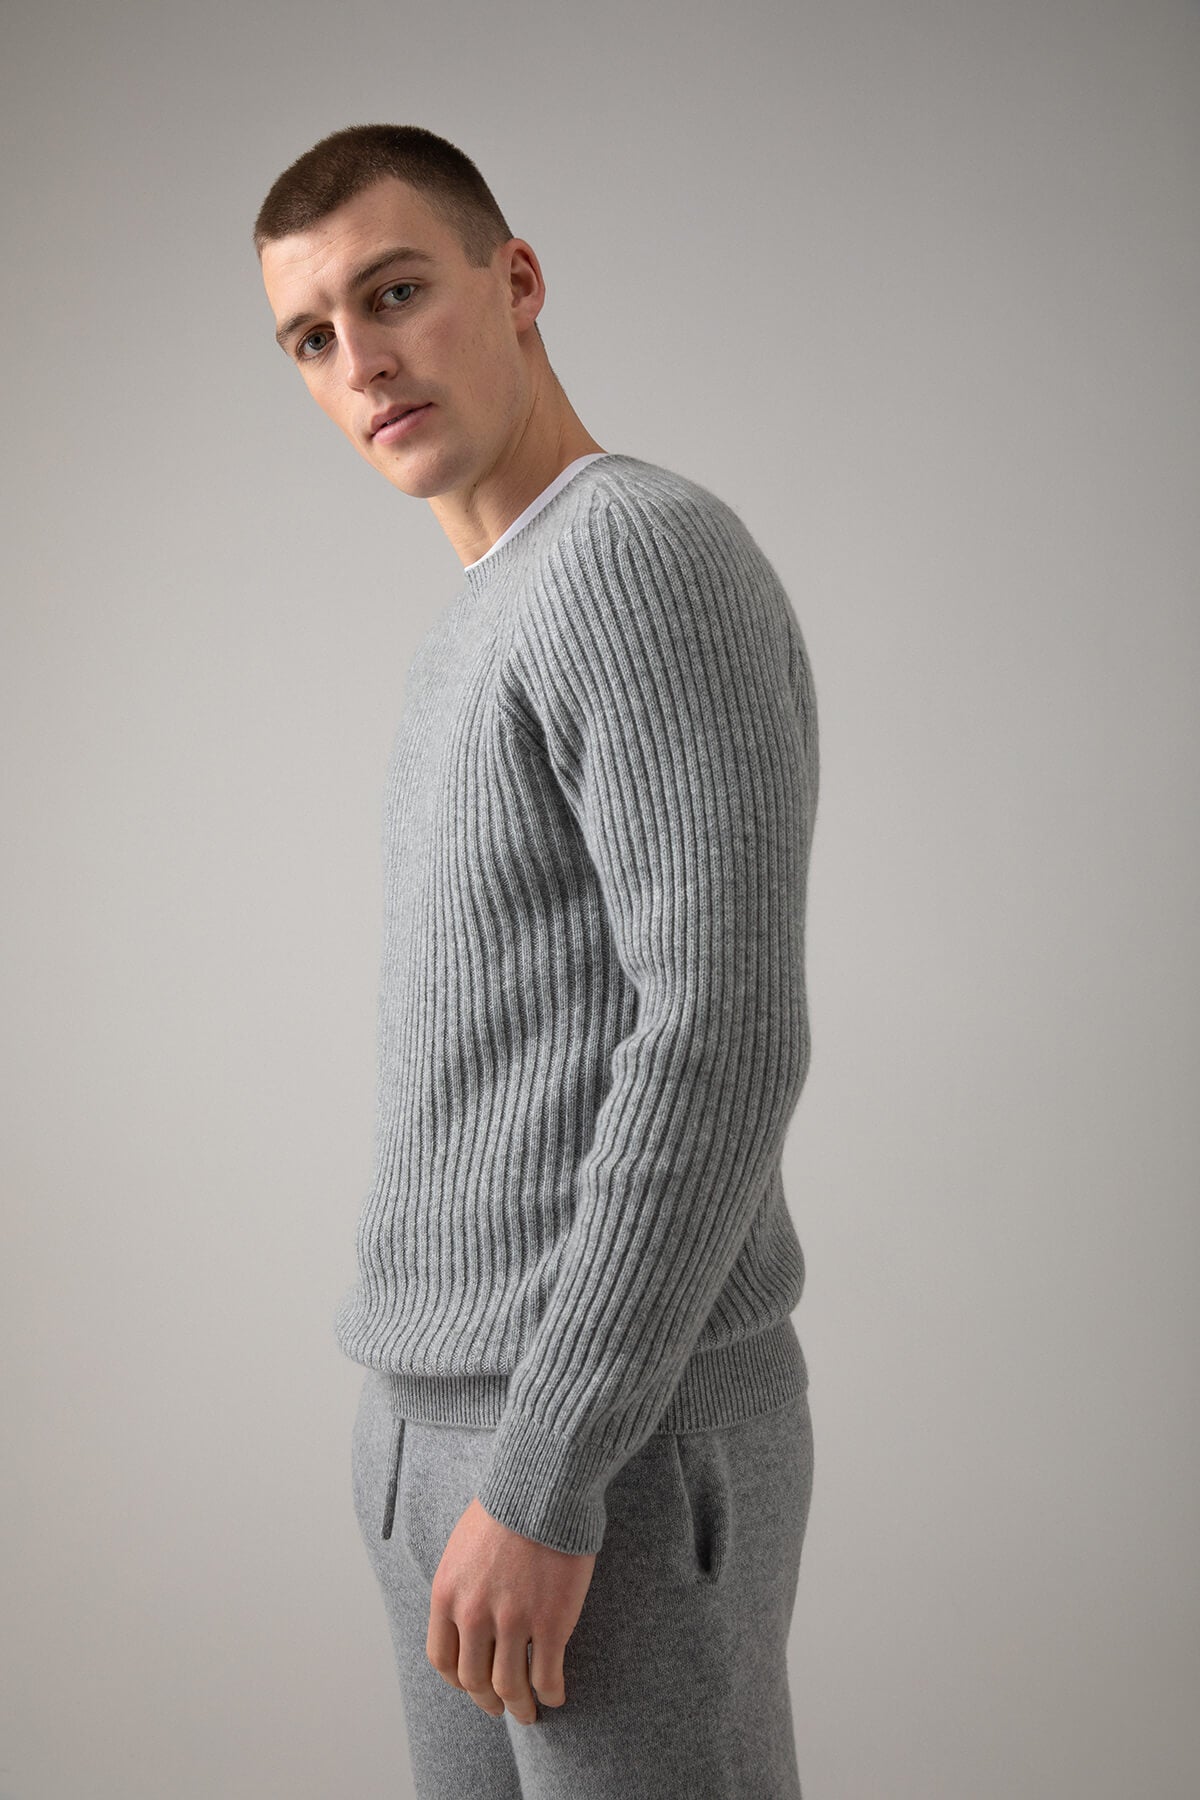 Johnstons of Elgin’s Men's Ribbed Cashmere Round Neck Jumper in Light Grey on model wearing grey joggers on a grey background KAI05105HA0308